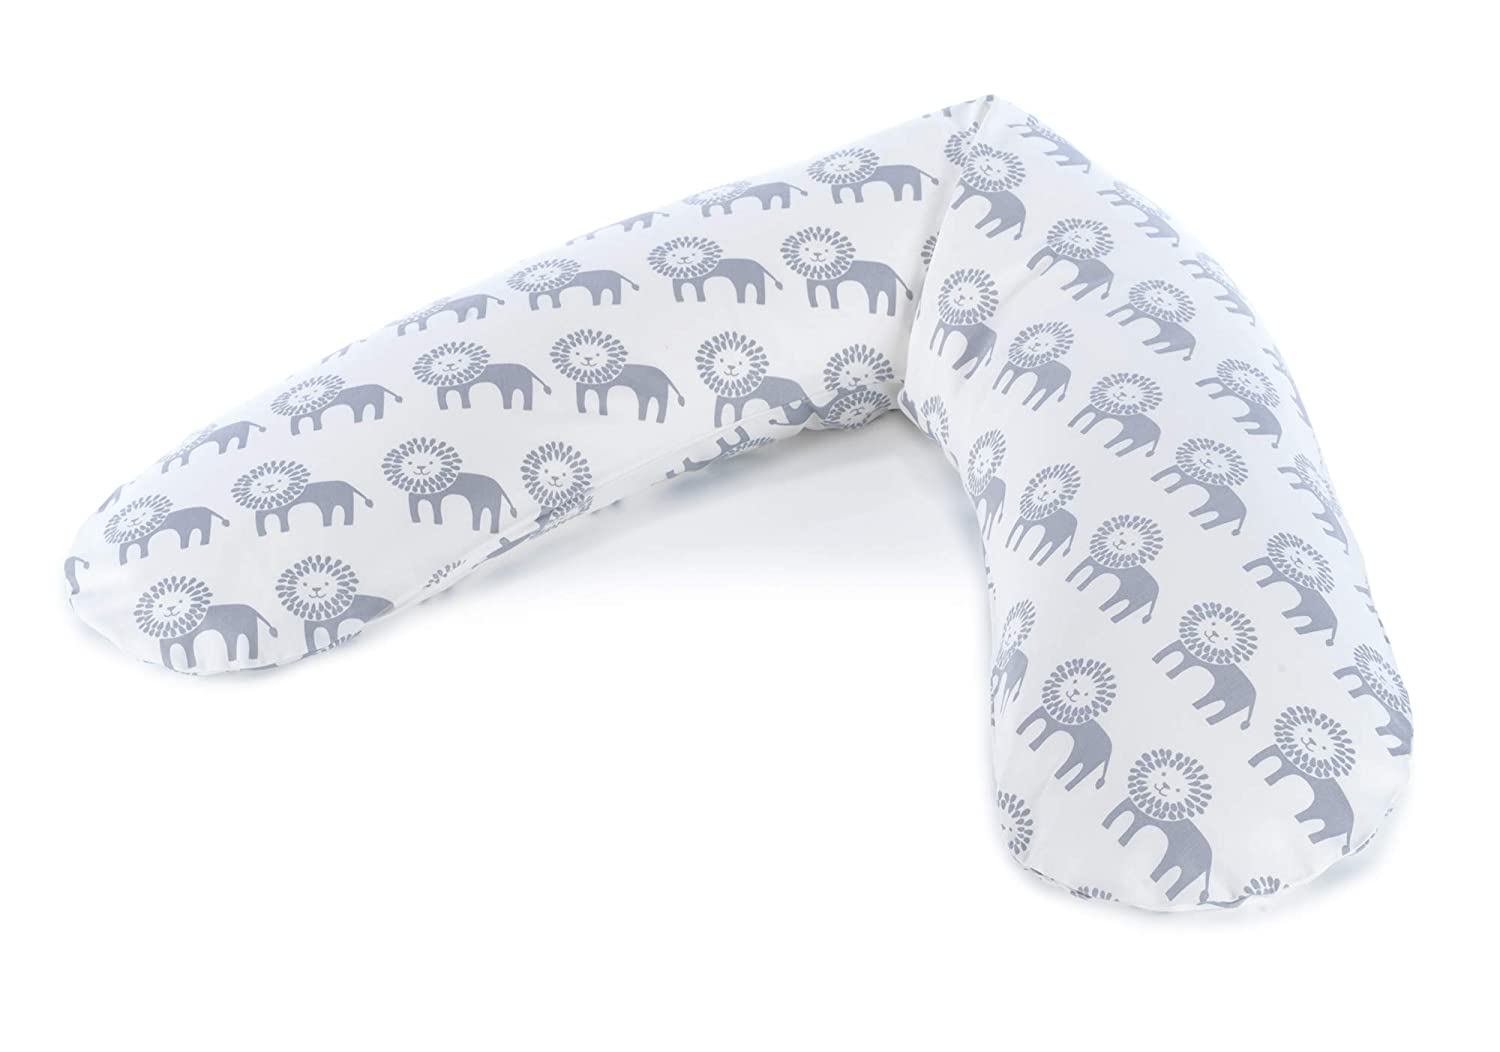 Replacement Cover For The Original Theraline Pregnancy And Nursing Pillow, 100% Cotton. Pattern Desert King